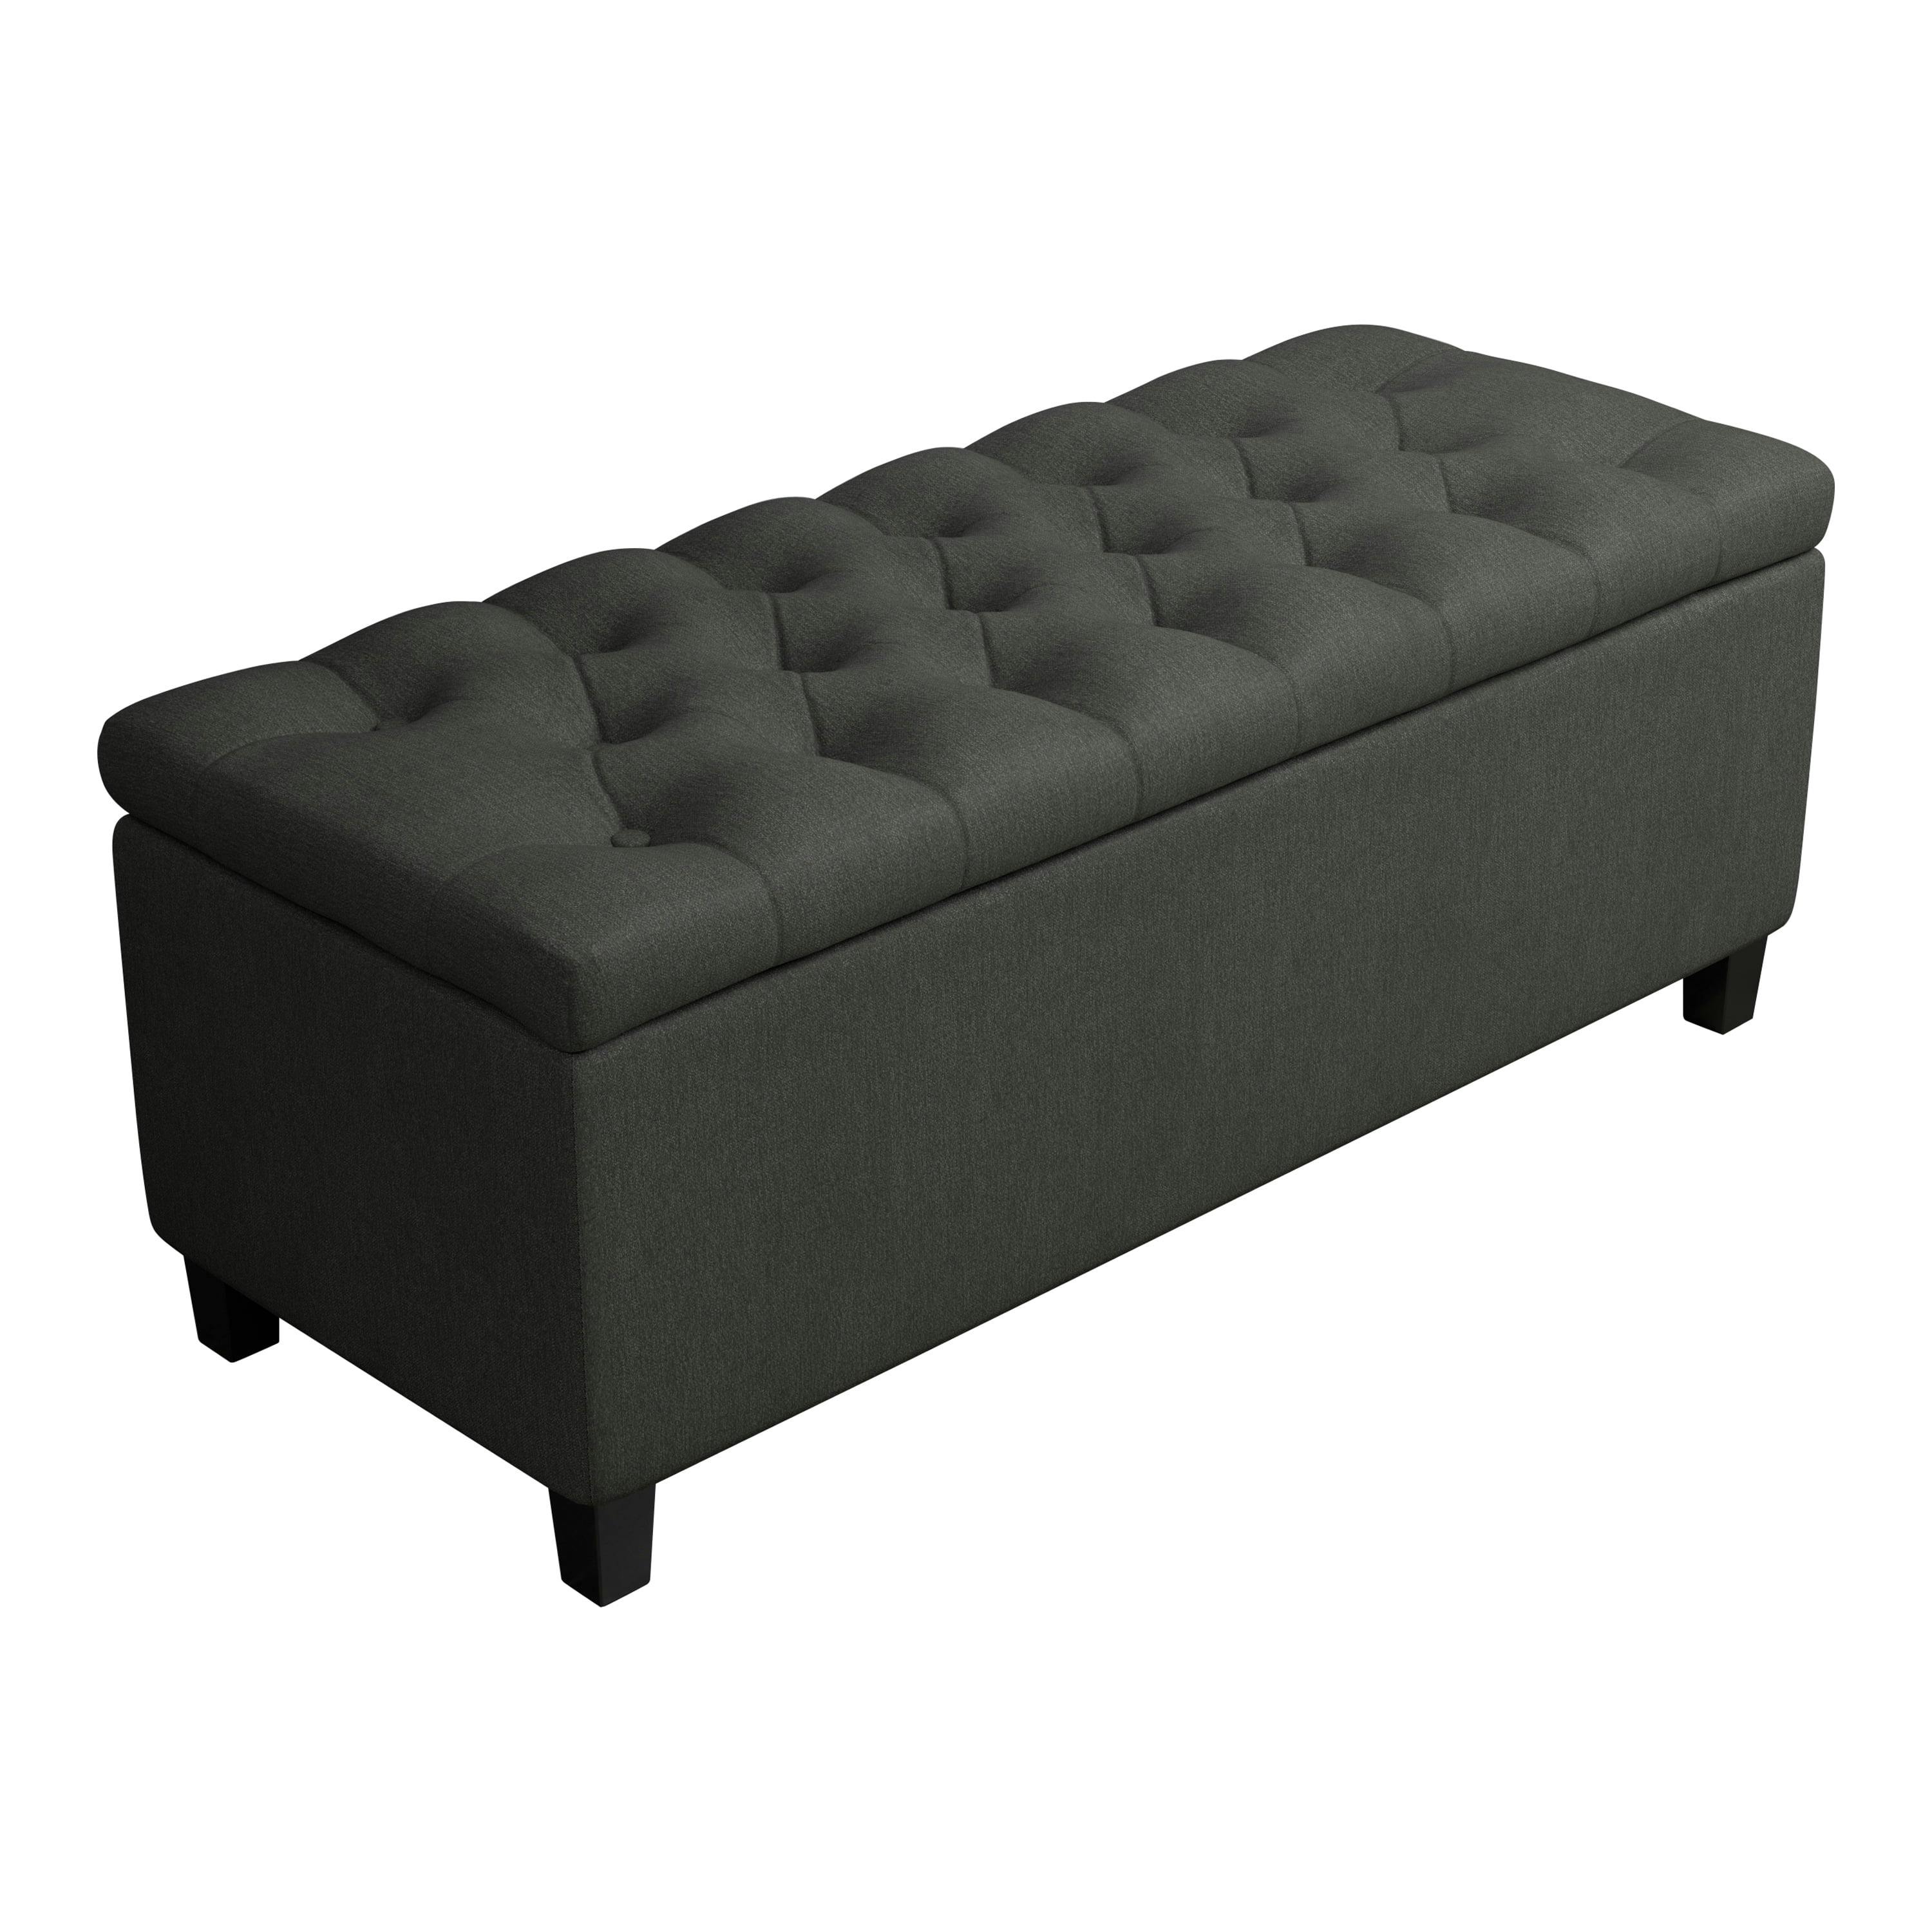 Charcoal Gray 44'' Transitional Tufted Storage Bench with Black Legs